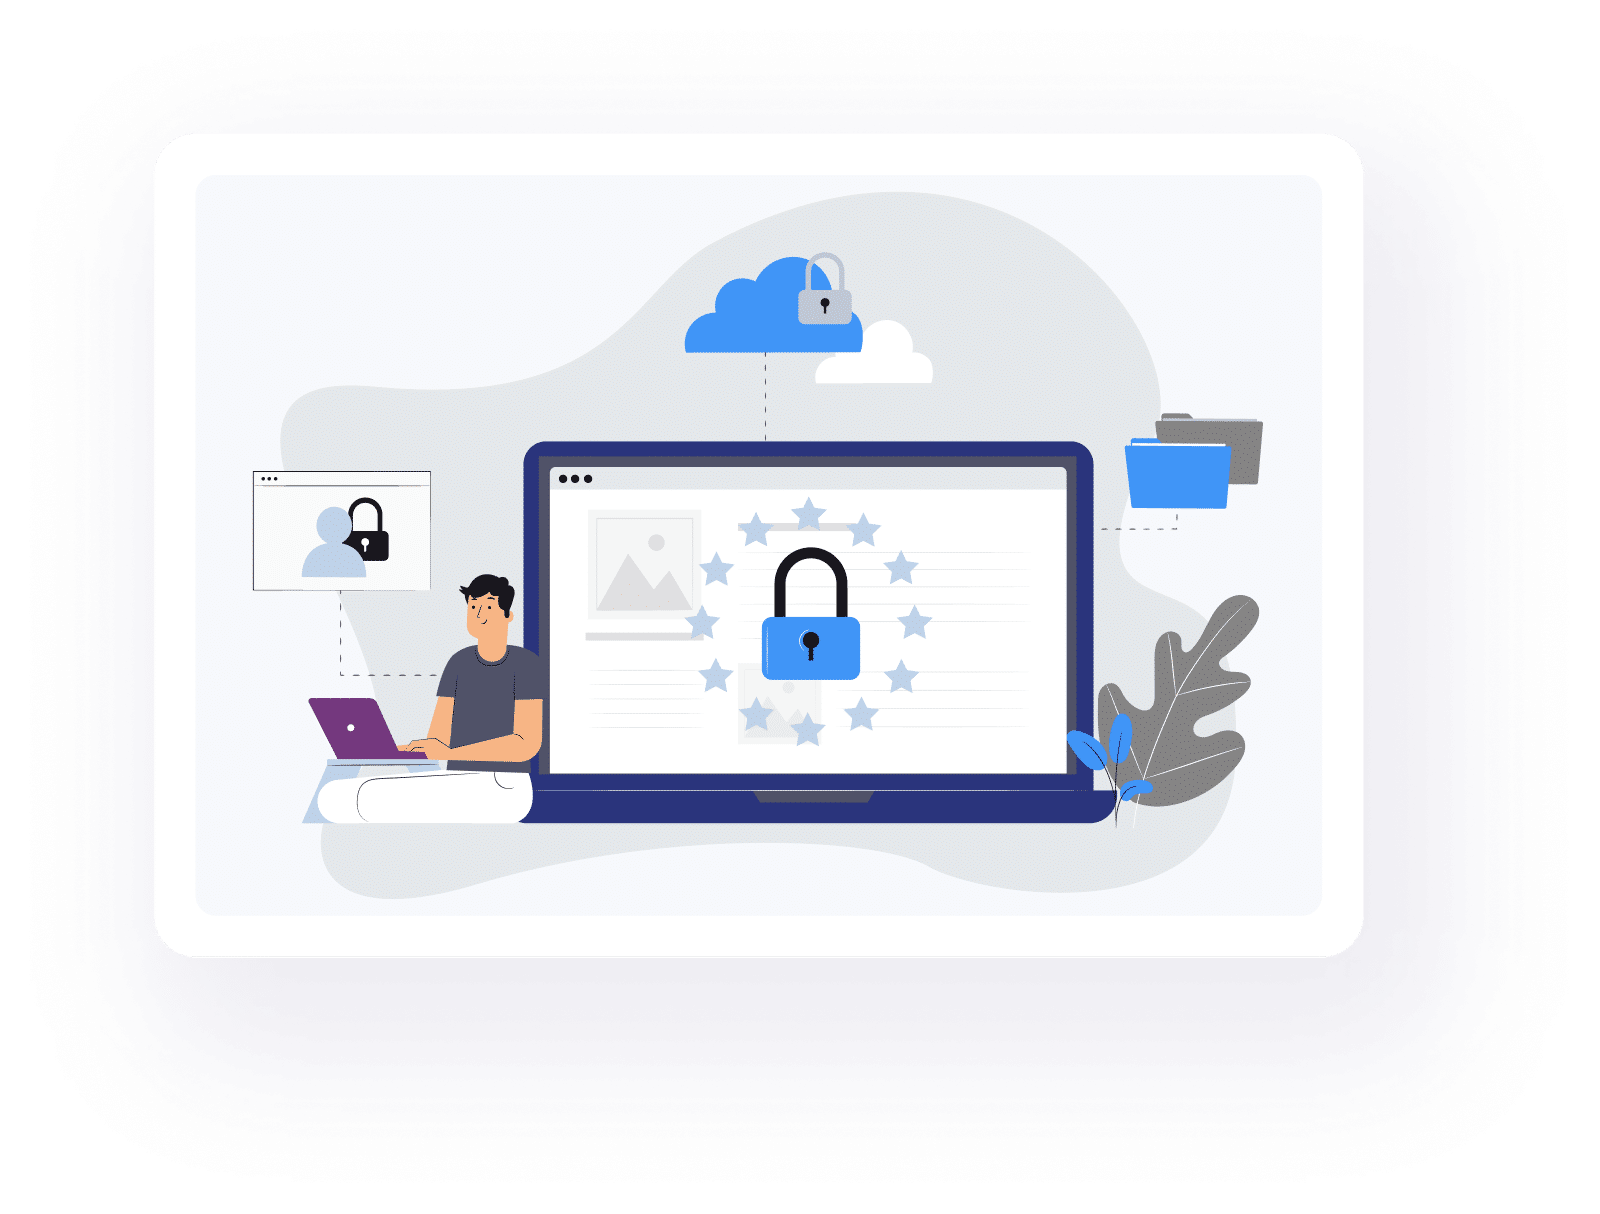 With Cleary platform, you can work with ease knowing that we keep our platform and your data safe, secure, and private.